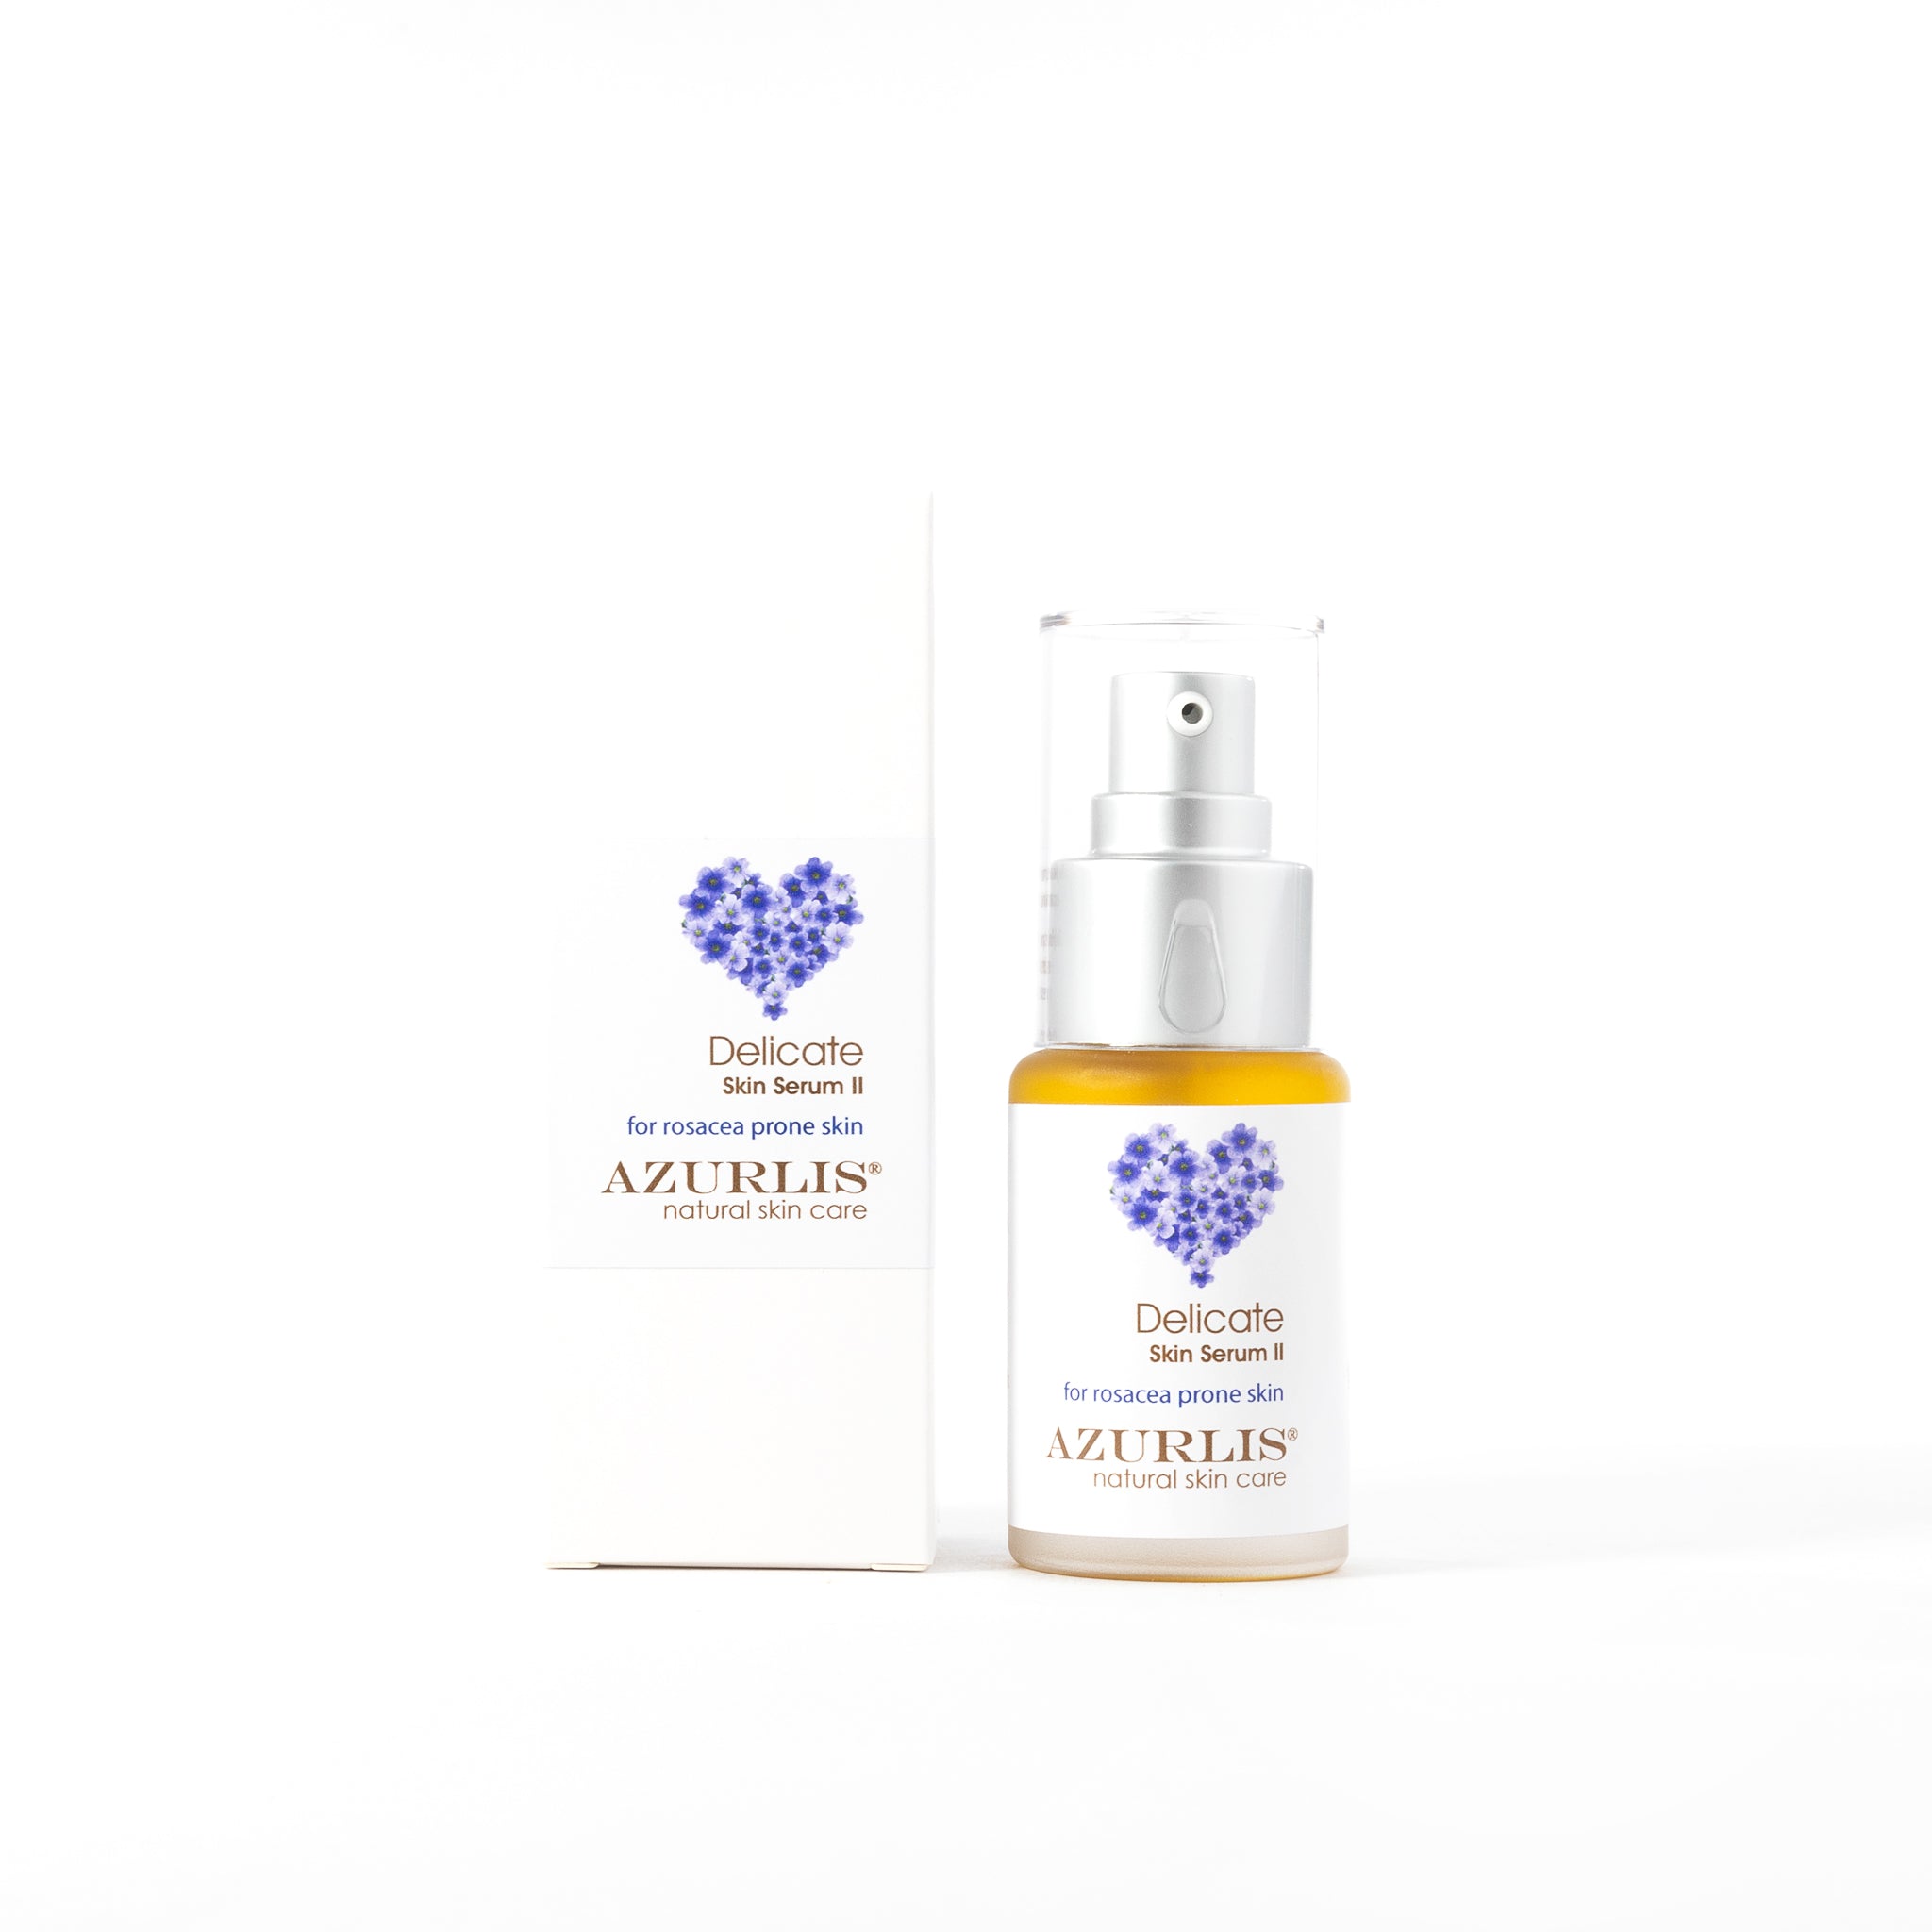 Azurlis™ Delicate Skin Serum II 30ml is for sensitive skin including rosacea-prone skin. This serum has the same basic components of the Delicate Skin Serum-I, but it contains a higher percentage of the active ingredients.